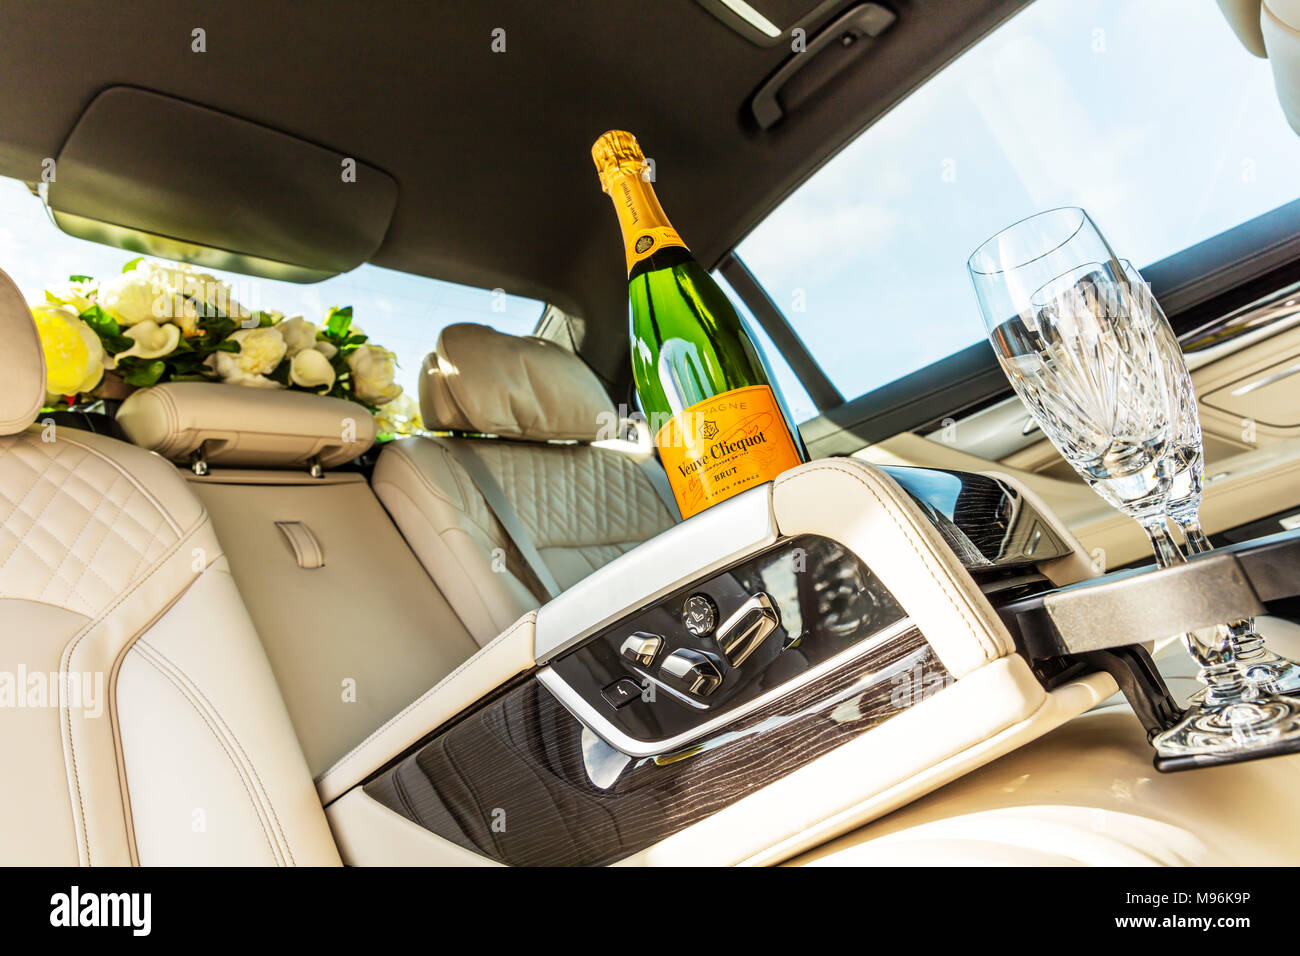 Champagner, Veuve Clicquot Champagner, Flasche Veuve Clicquot Champagner,  Champagner Flasche im Auto, Veuve Clicquot, Champagner, Champagner Gläser  Stockfotografie - Alamy